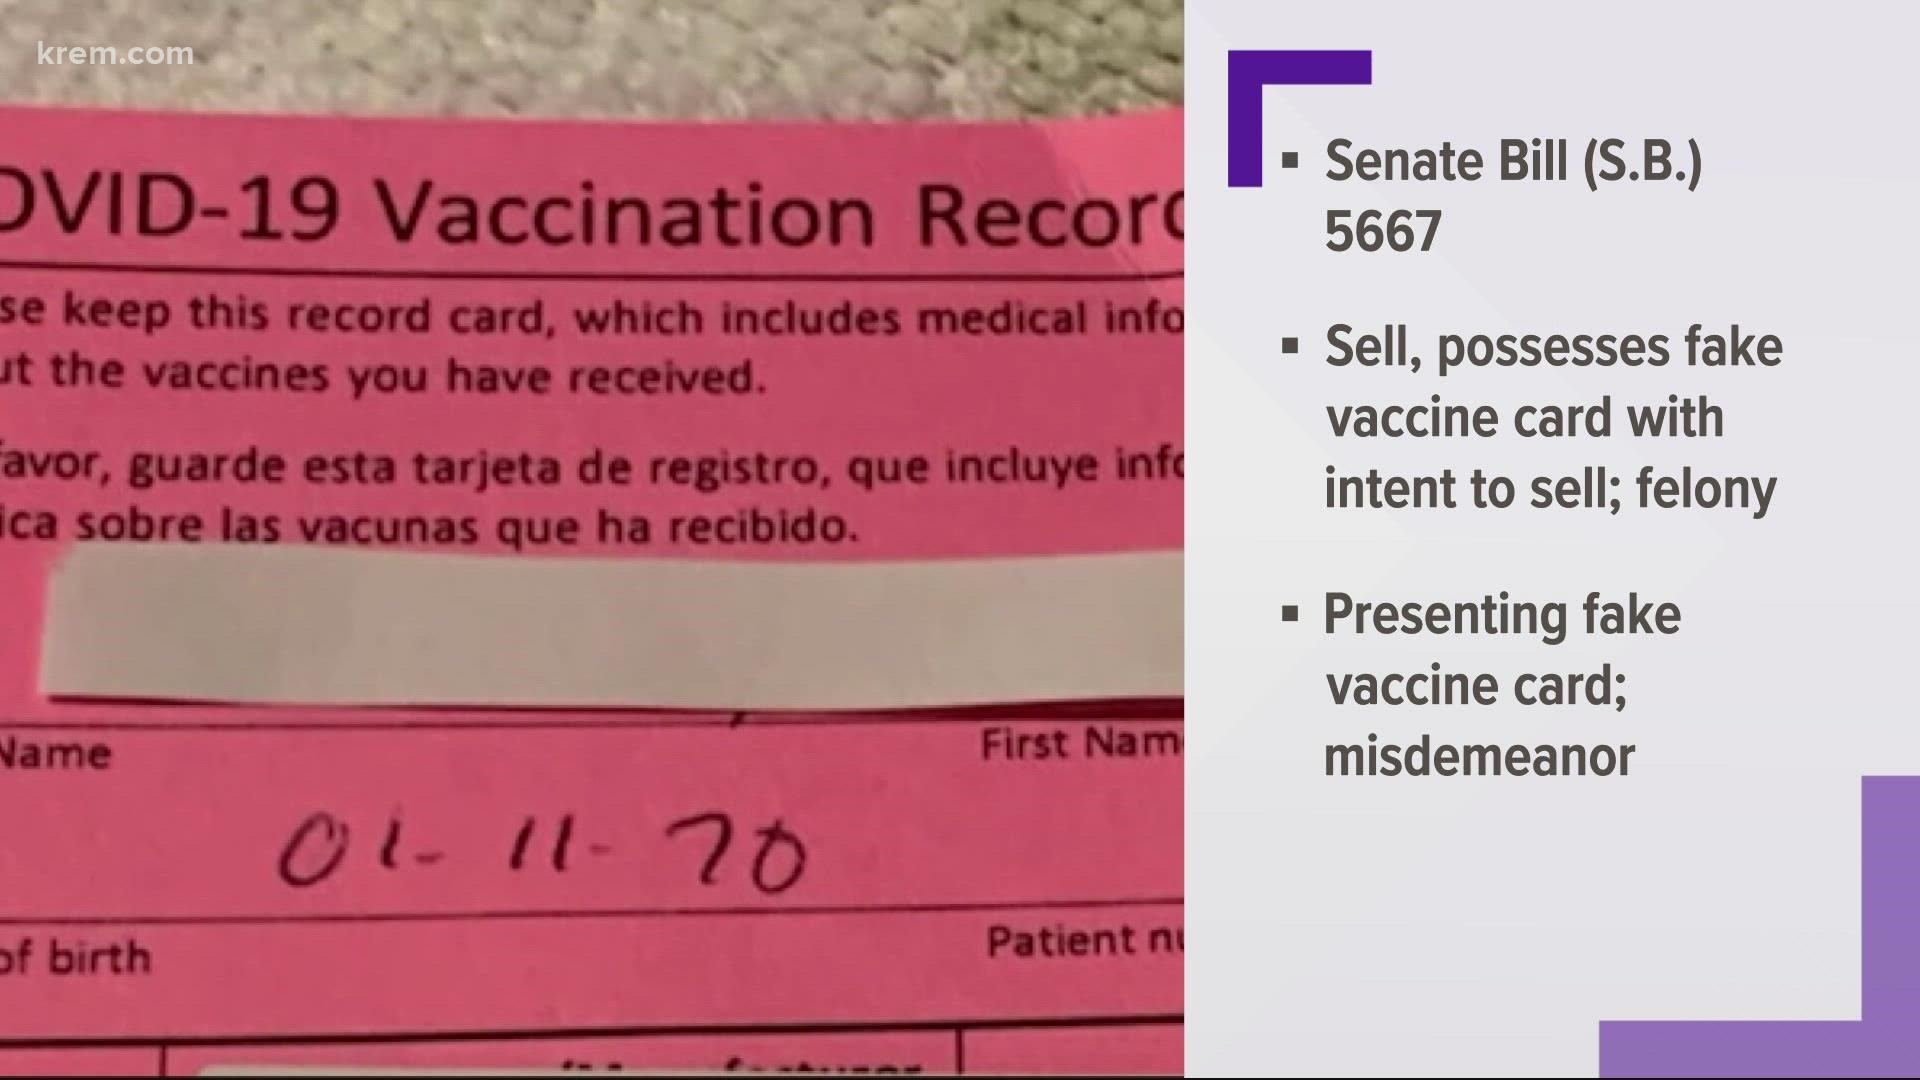 Any person who knowingly sells, offers to sell, or possesses a false COVID-19 vaccine card with intent to sell would be found guilty of a Class C felony.